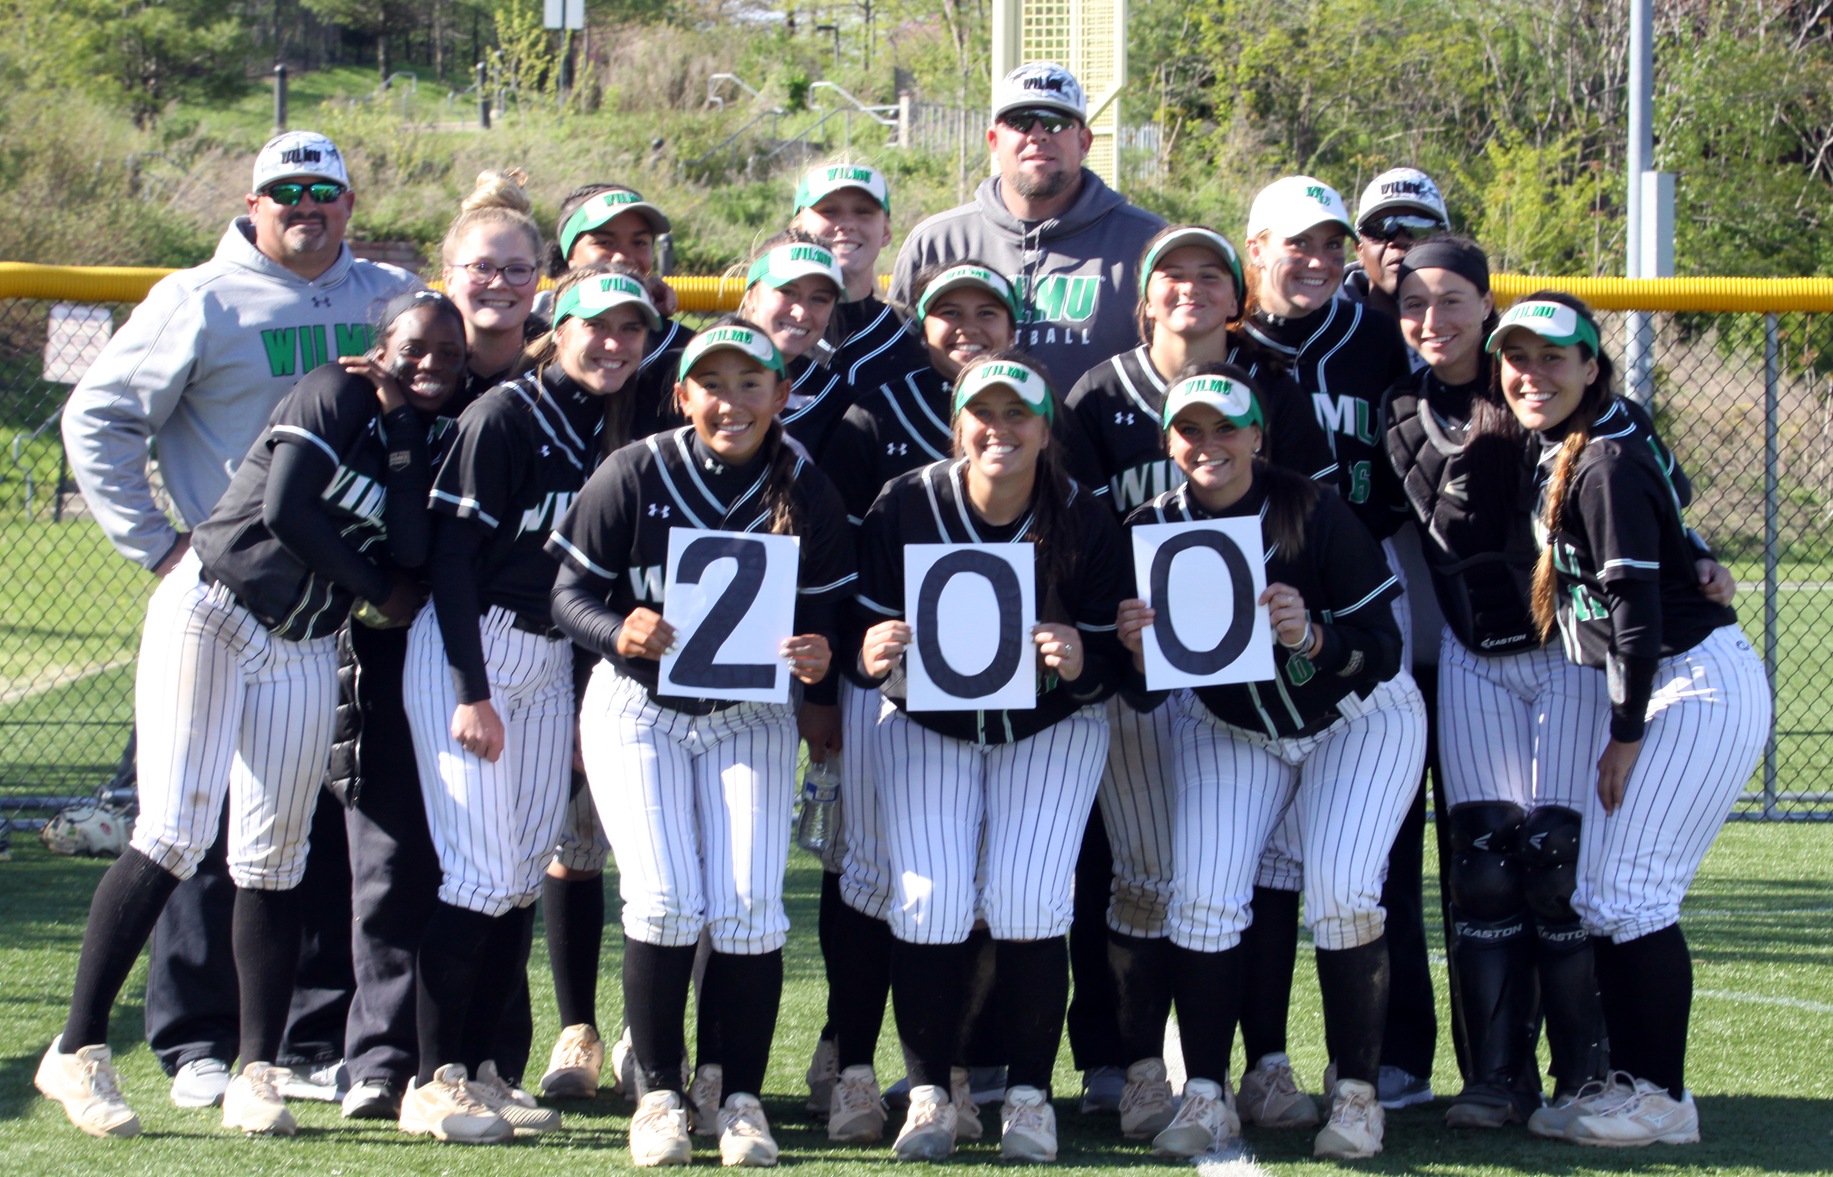 Copyright 2019; Wilmington University. All rights reserved. Photo of the team celebrating with head coach Mike Shehorn for his 200th career win after game one. Taken by Dan Lauletta. April 27, 2019 at Felician.